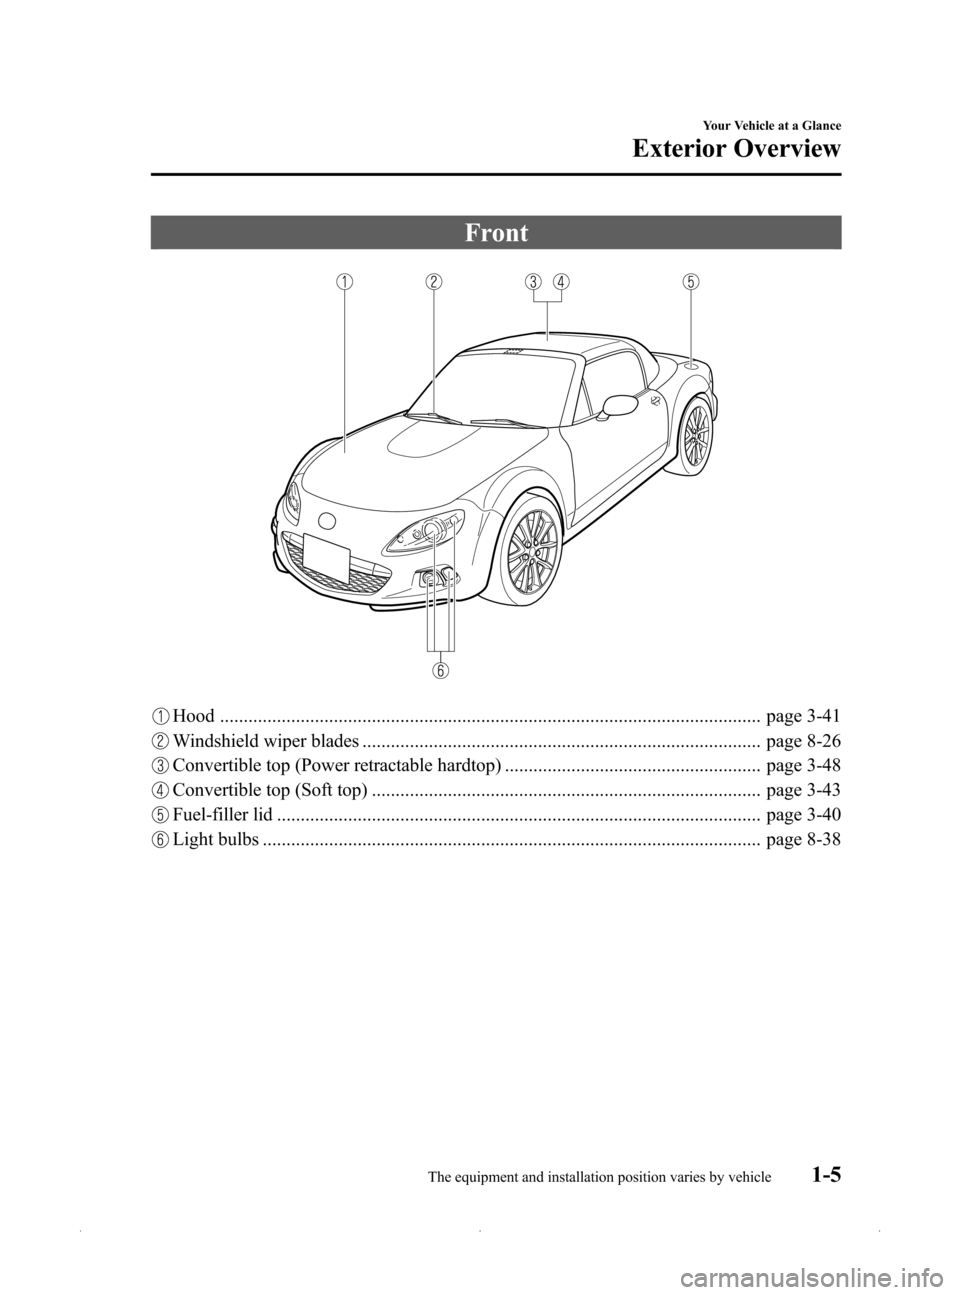 MAZDA MODEL MX-5 PRHT 2015   (in English) User Guide Black plate (11,1)
Front
Hood .................................................................................................................. page 3-41
Windshield wiper blades .....................